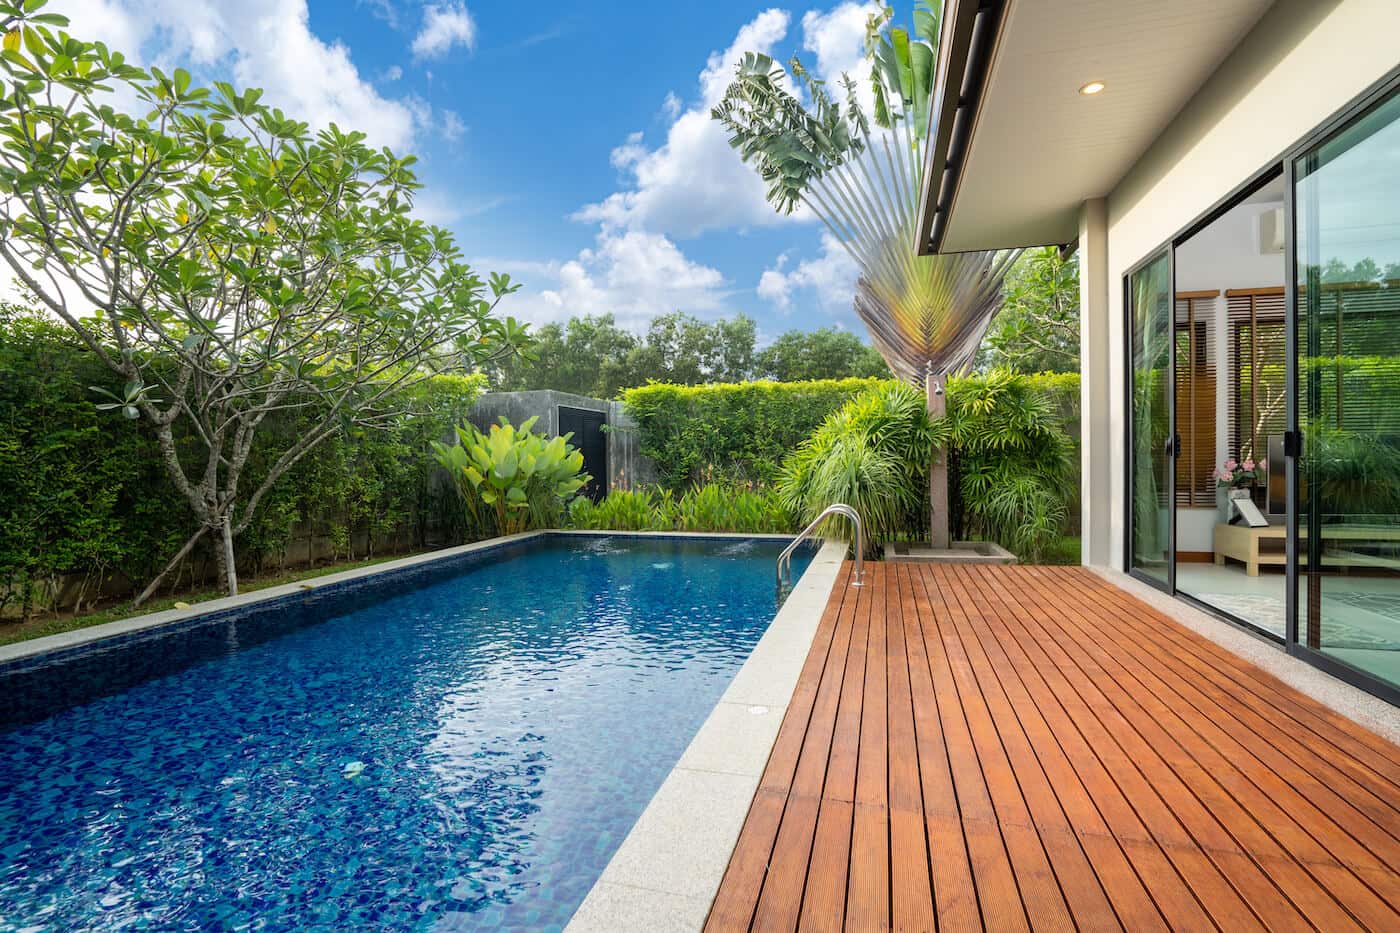 exterior picture of swimming pool attached to accommodation surrounded by foliage and decking